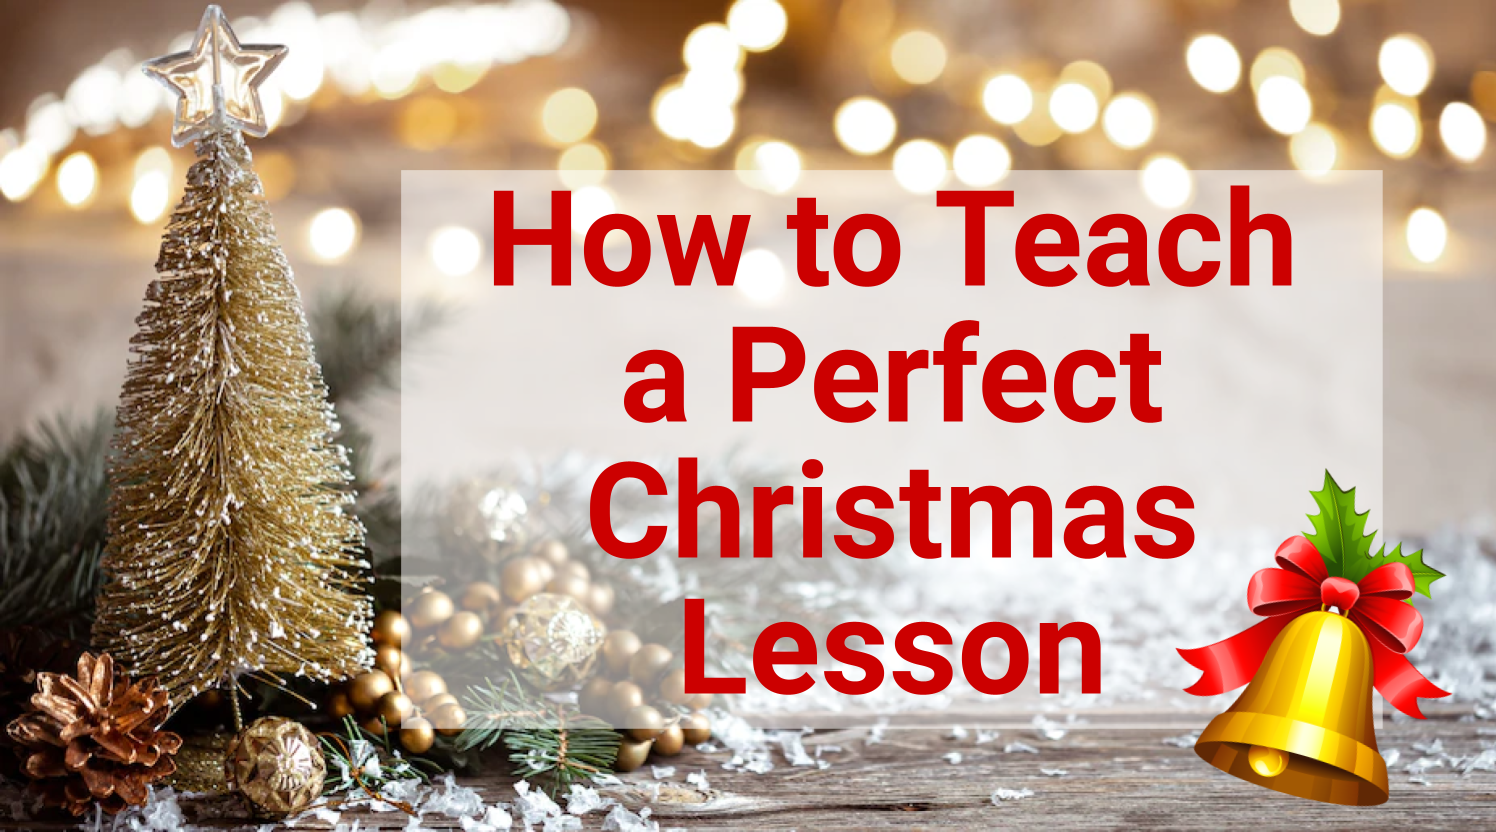 How to Teach a Perfect Christmas Lesson